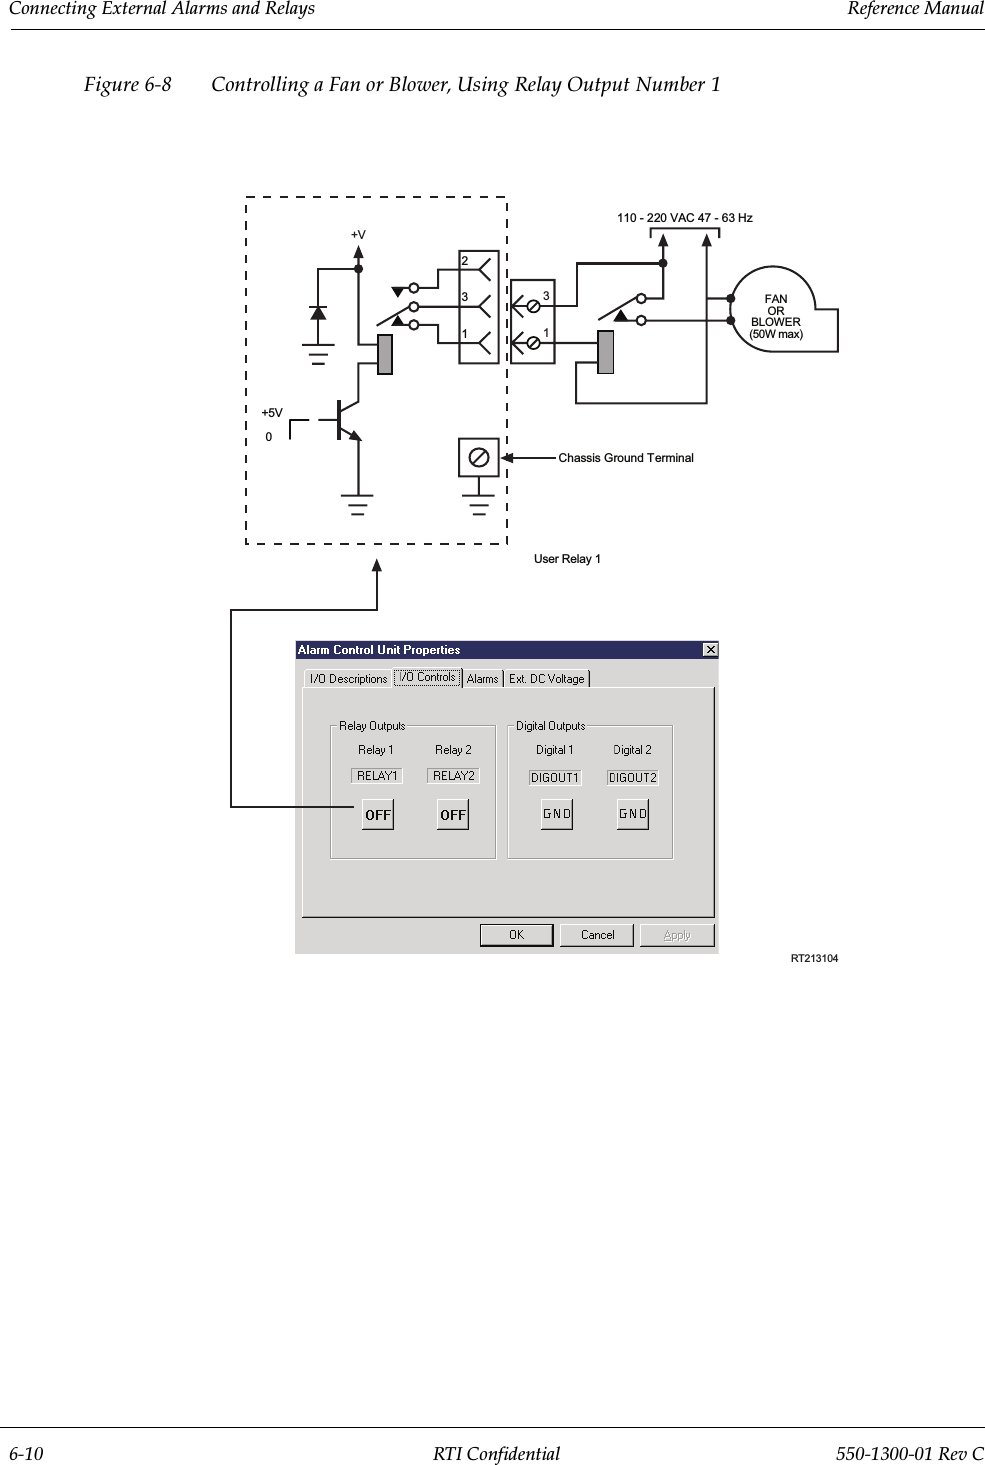 Connecting External Alarms and Relays                 Reference Manual6-10 RTI Confidential 550-1300-01 Rev CFigure 6-8 Controlling a Fan or Blower, Using Relay Output Number 1110 - 220 VAC 47 - 63 HzChassis Ground TerminalRT213104+5V013231+VFANORBLOWER(50W max)User Relay 1